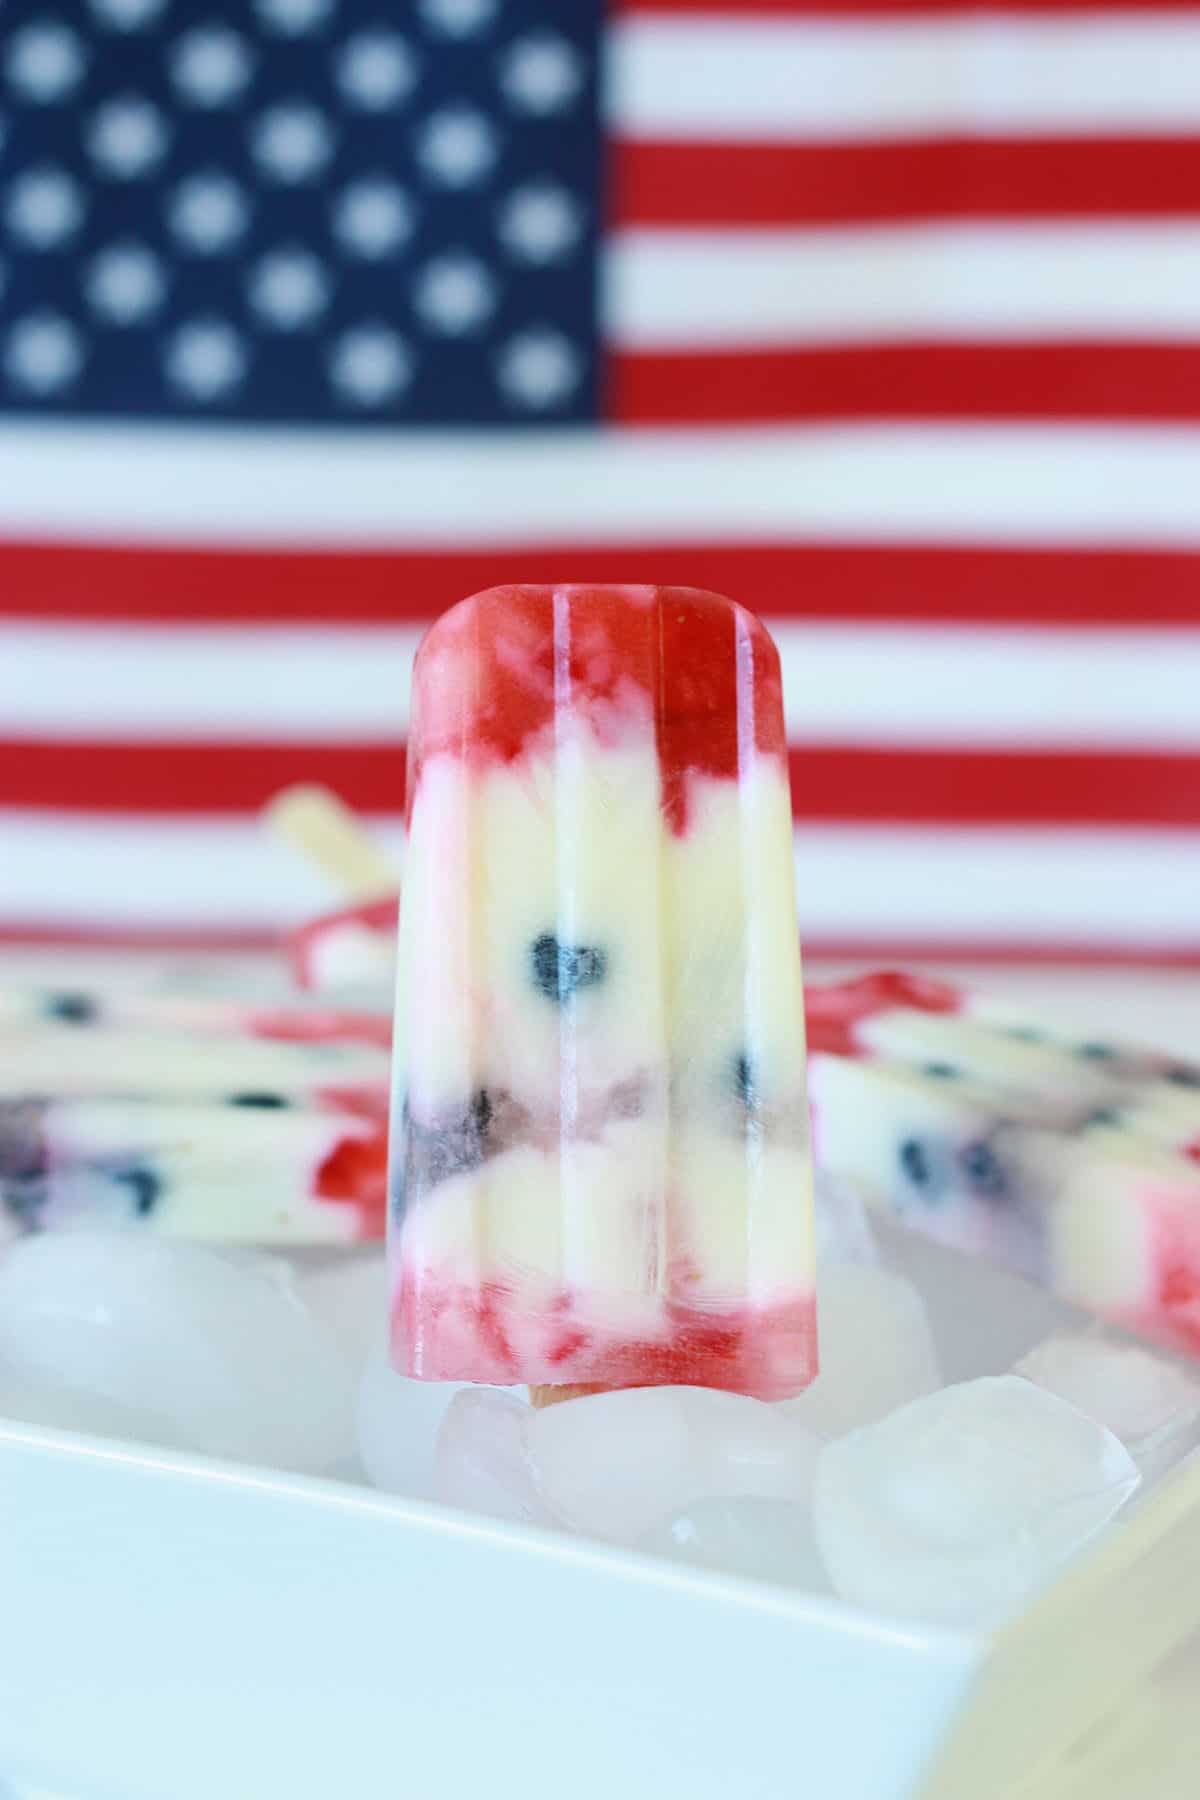 red white and blue popsicle with healthy ingredients in a bowl of ice with an american flag in the background